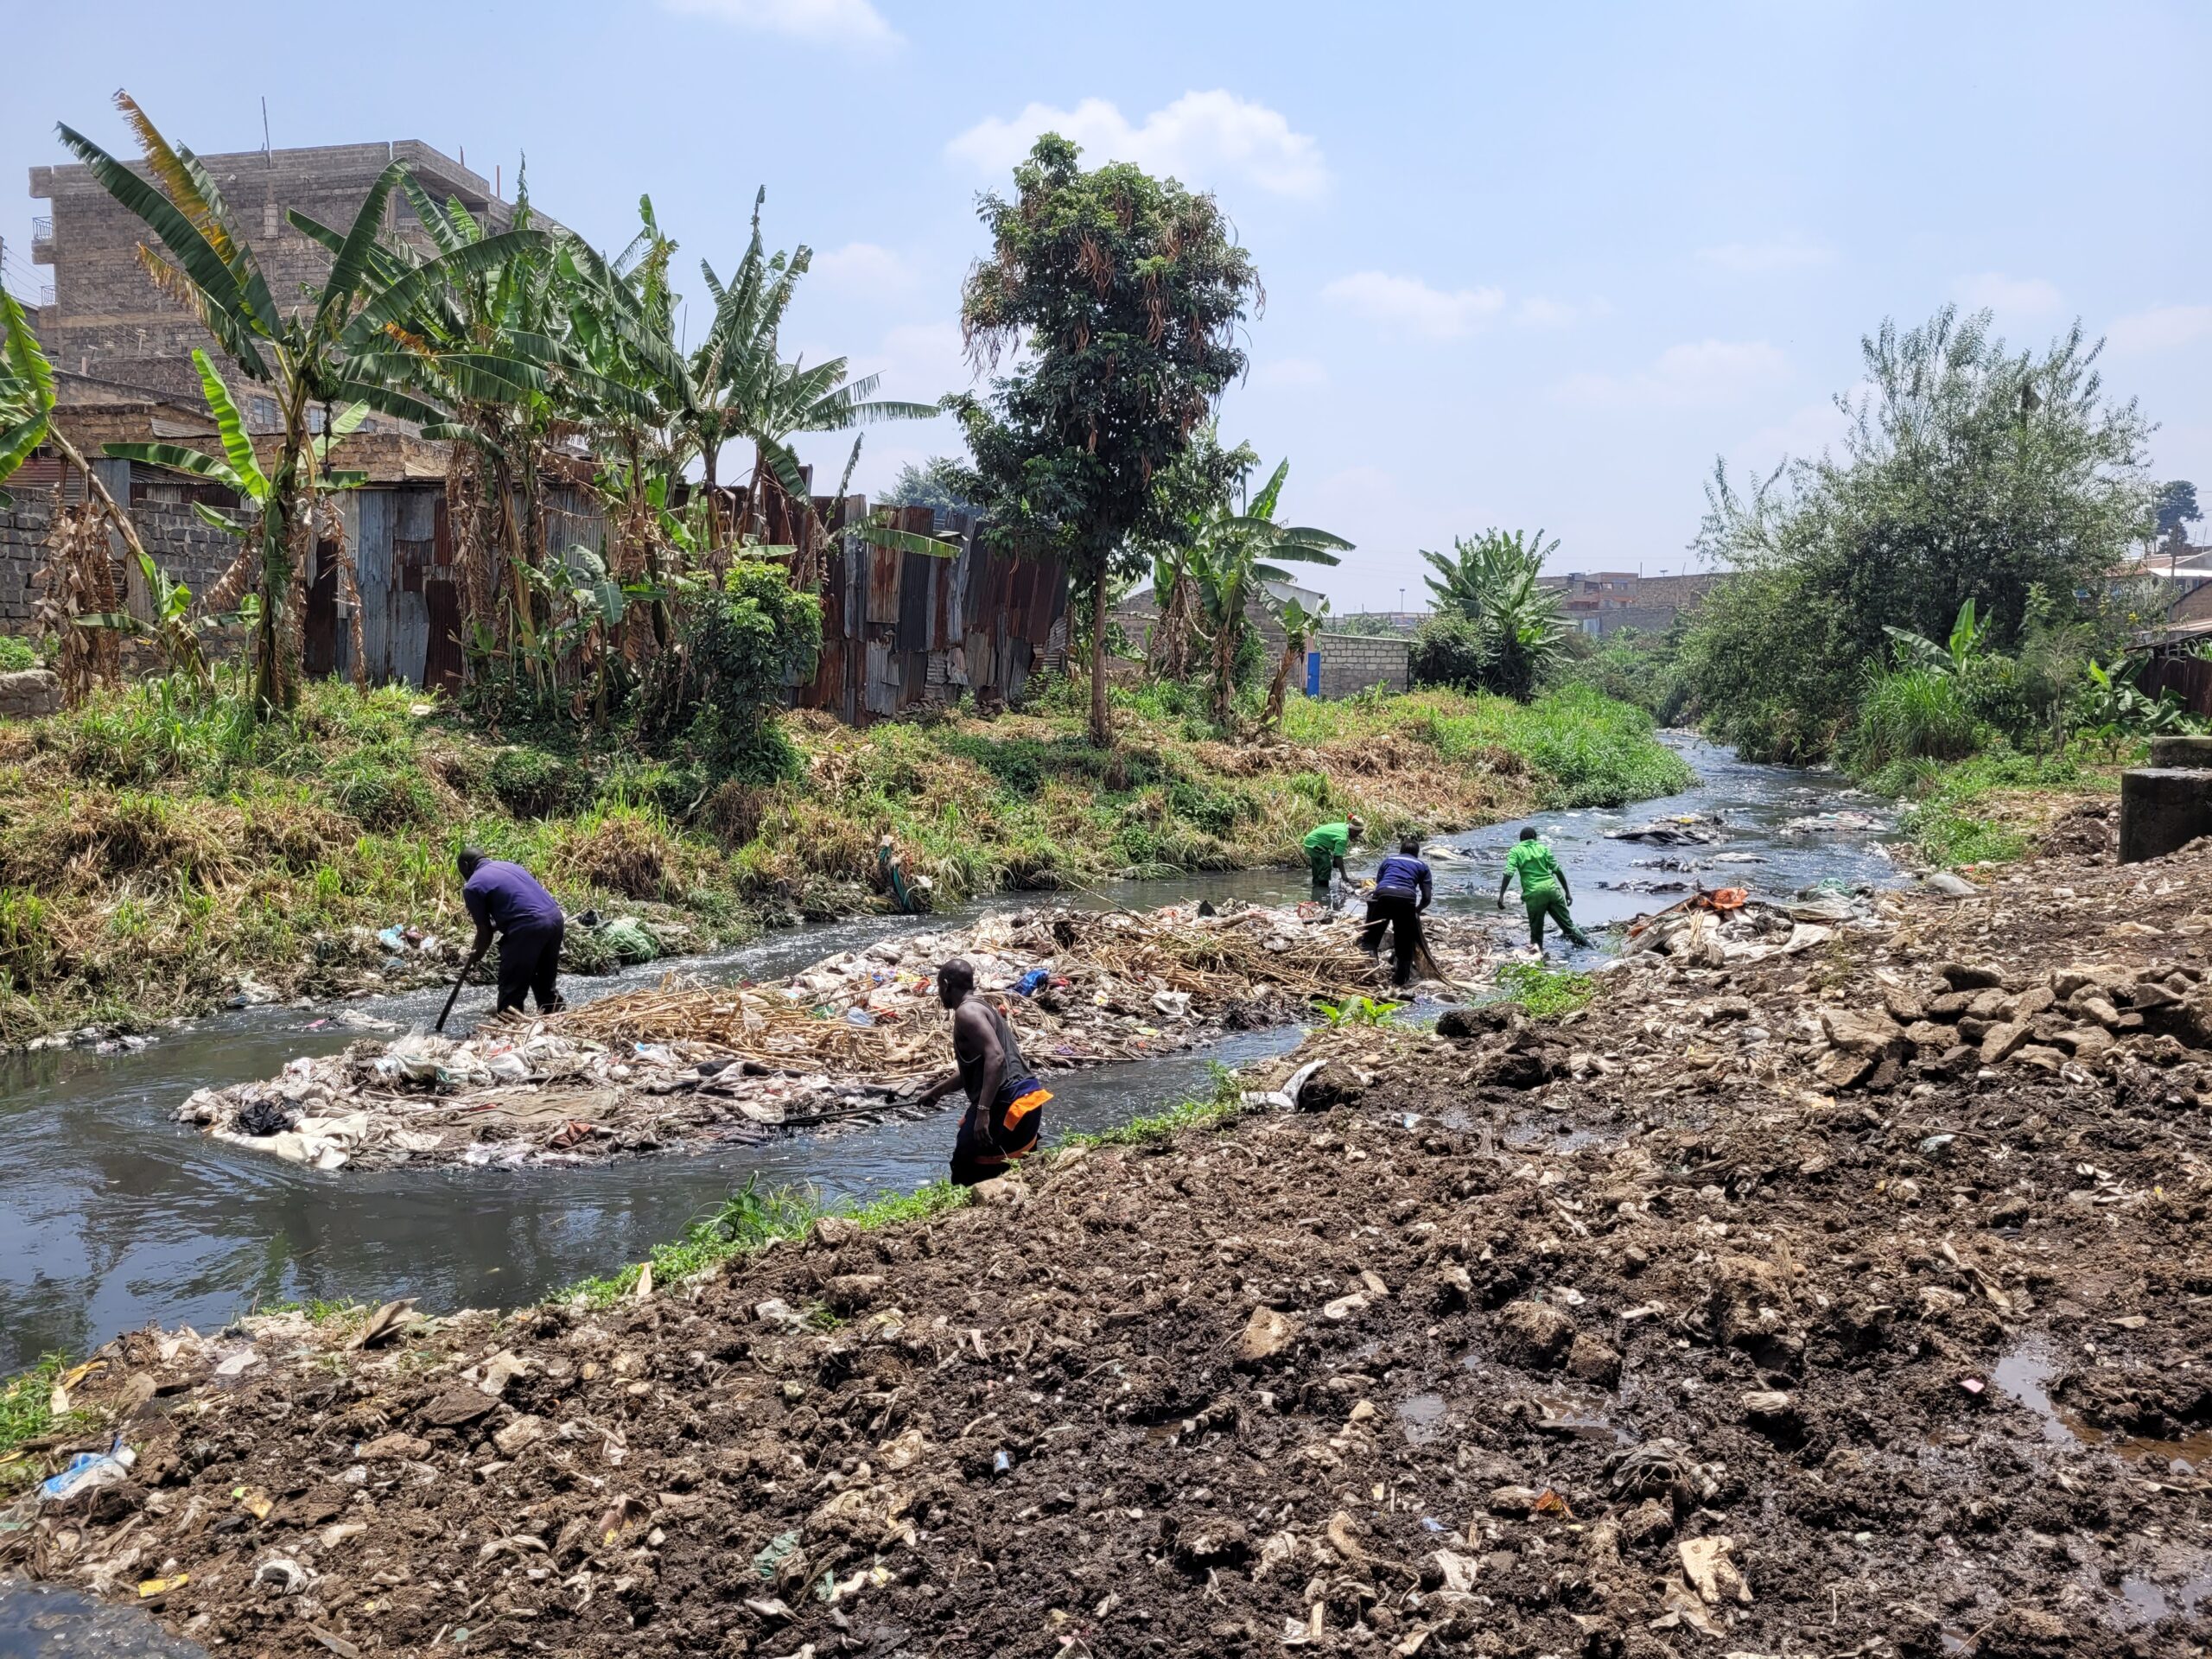 In the foreground, a muddy riverbank. 5 volunteers wearing green are in the river removing trash. The river flows through the photo from left to right. An island of garbage is formed in the middle of the river. Across the river, the river bank is sloped and covered in grass, with tropical trees growing around a small wooden house.